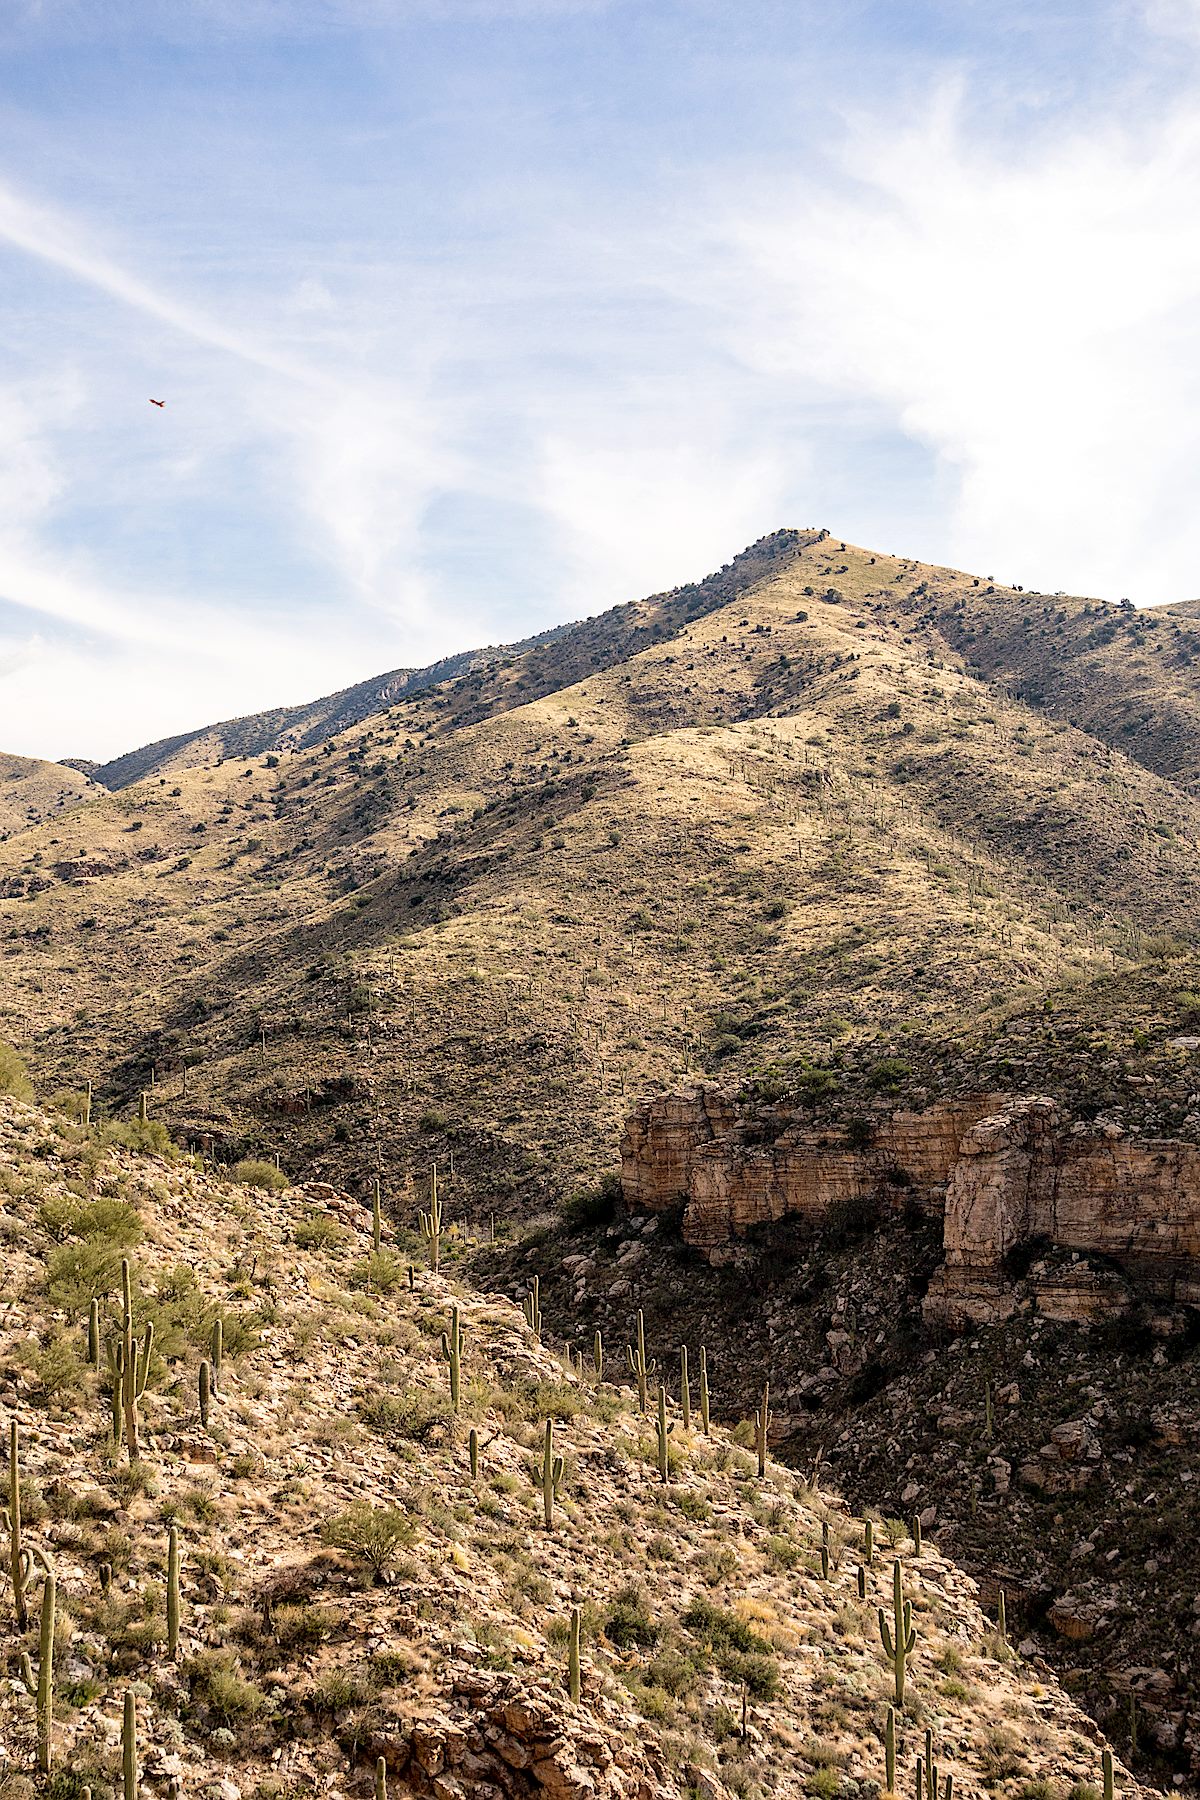 Looking across Agua Caliente Canyon to False Hope Hill - a prominent high point on the Agua Caliente Hill Trail. December 2014.